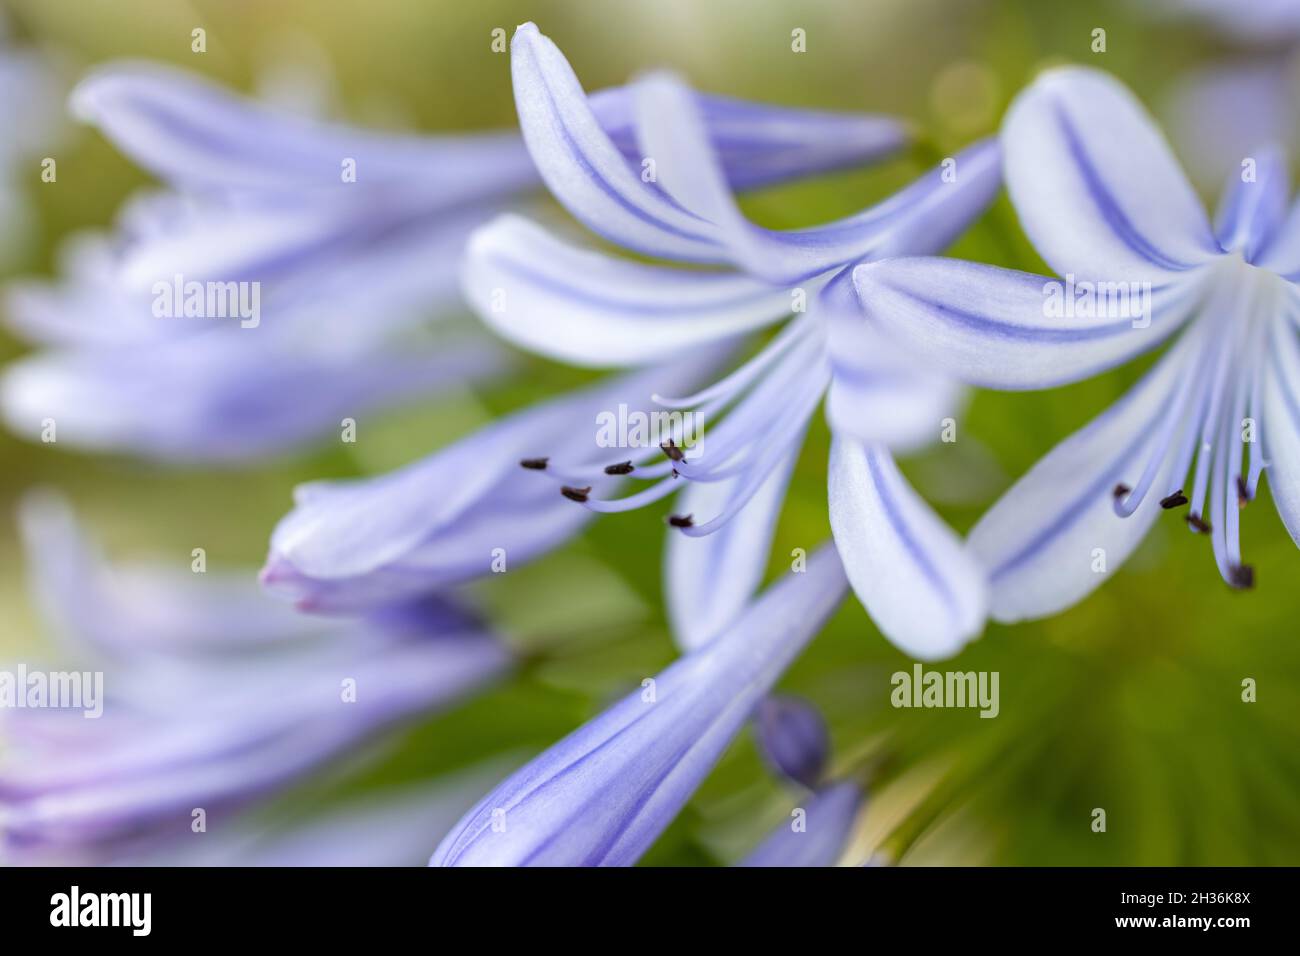 Selective closeup of Agapanthus flowers Stock Photo